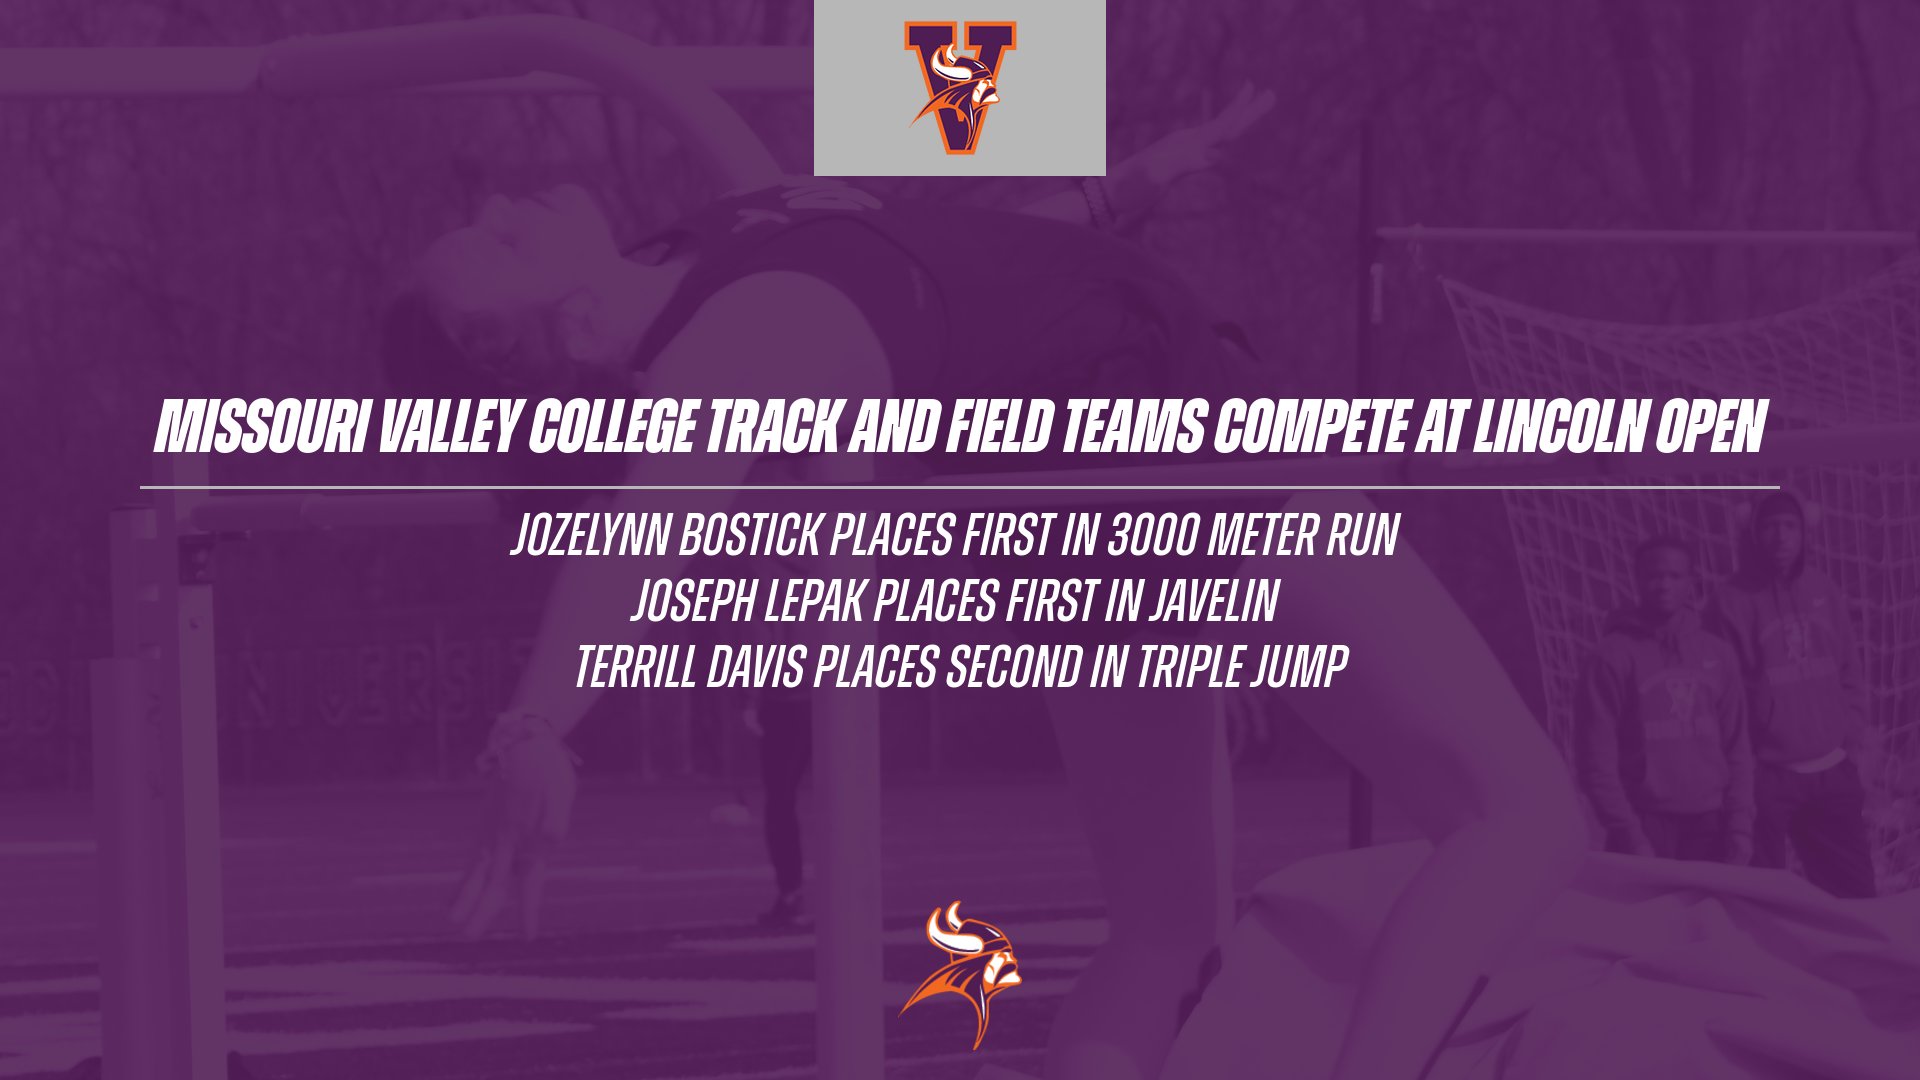 MISSOURI VALLEY COLLEGE TRACK AND FIELD TEAMS COMPETE AT LINCOLN OPEN